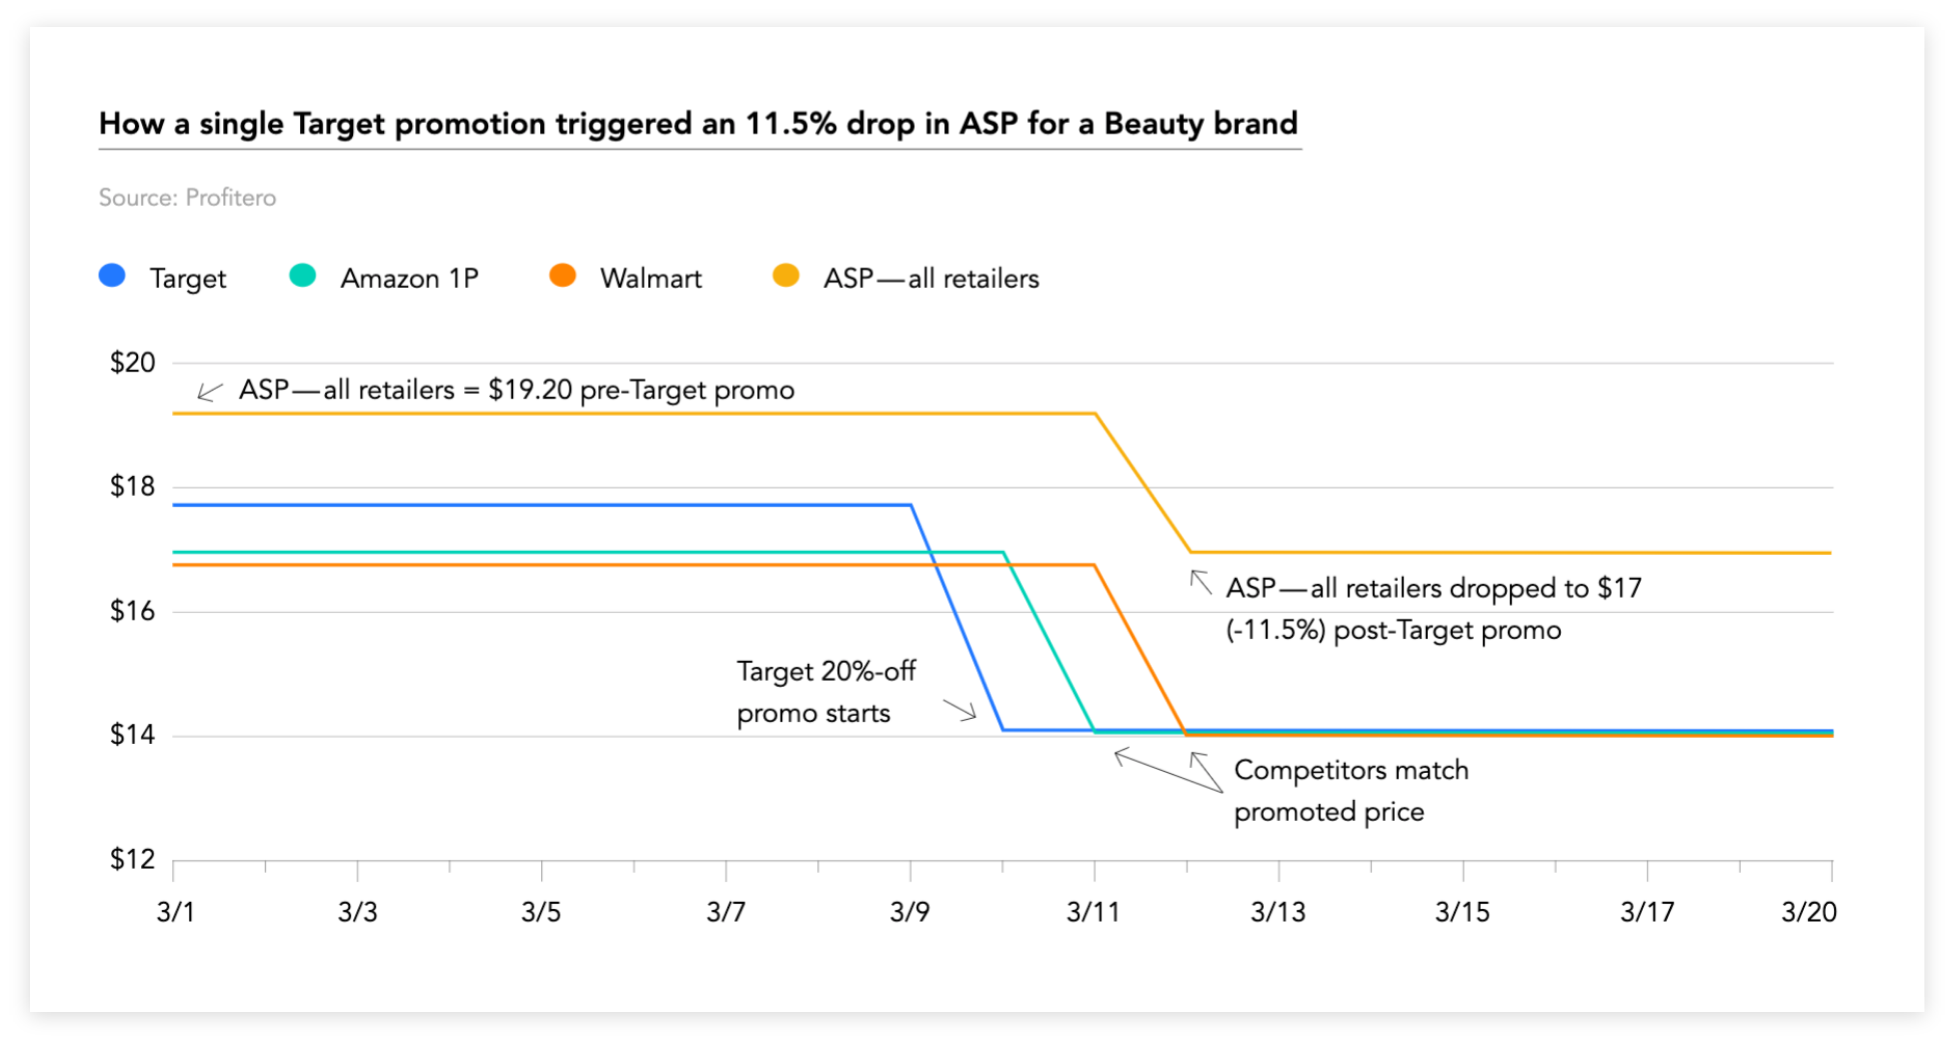 chart titled "How a single Target promotion triggered an 11.5% drop in ASP for a Beauty brand"